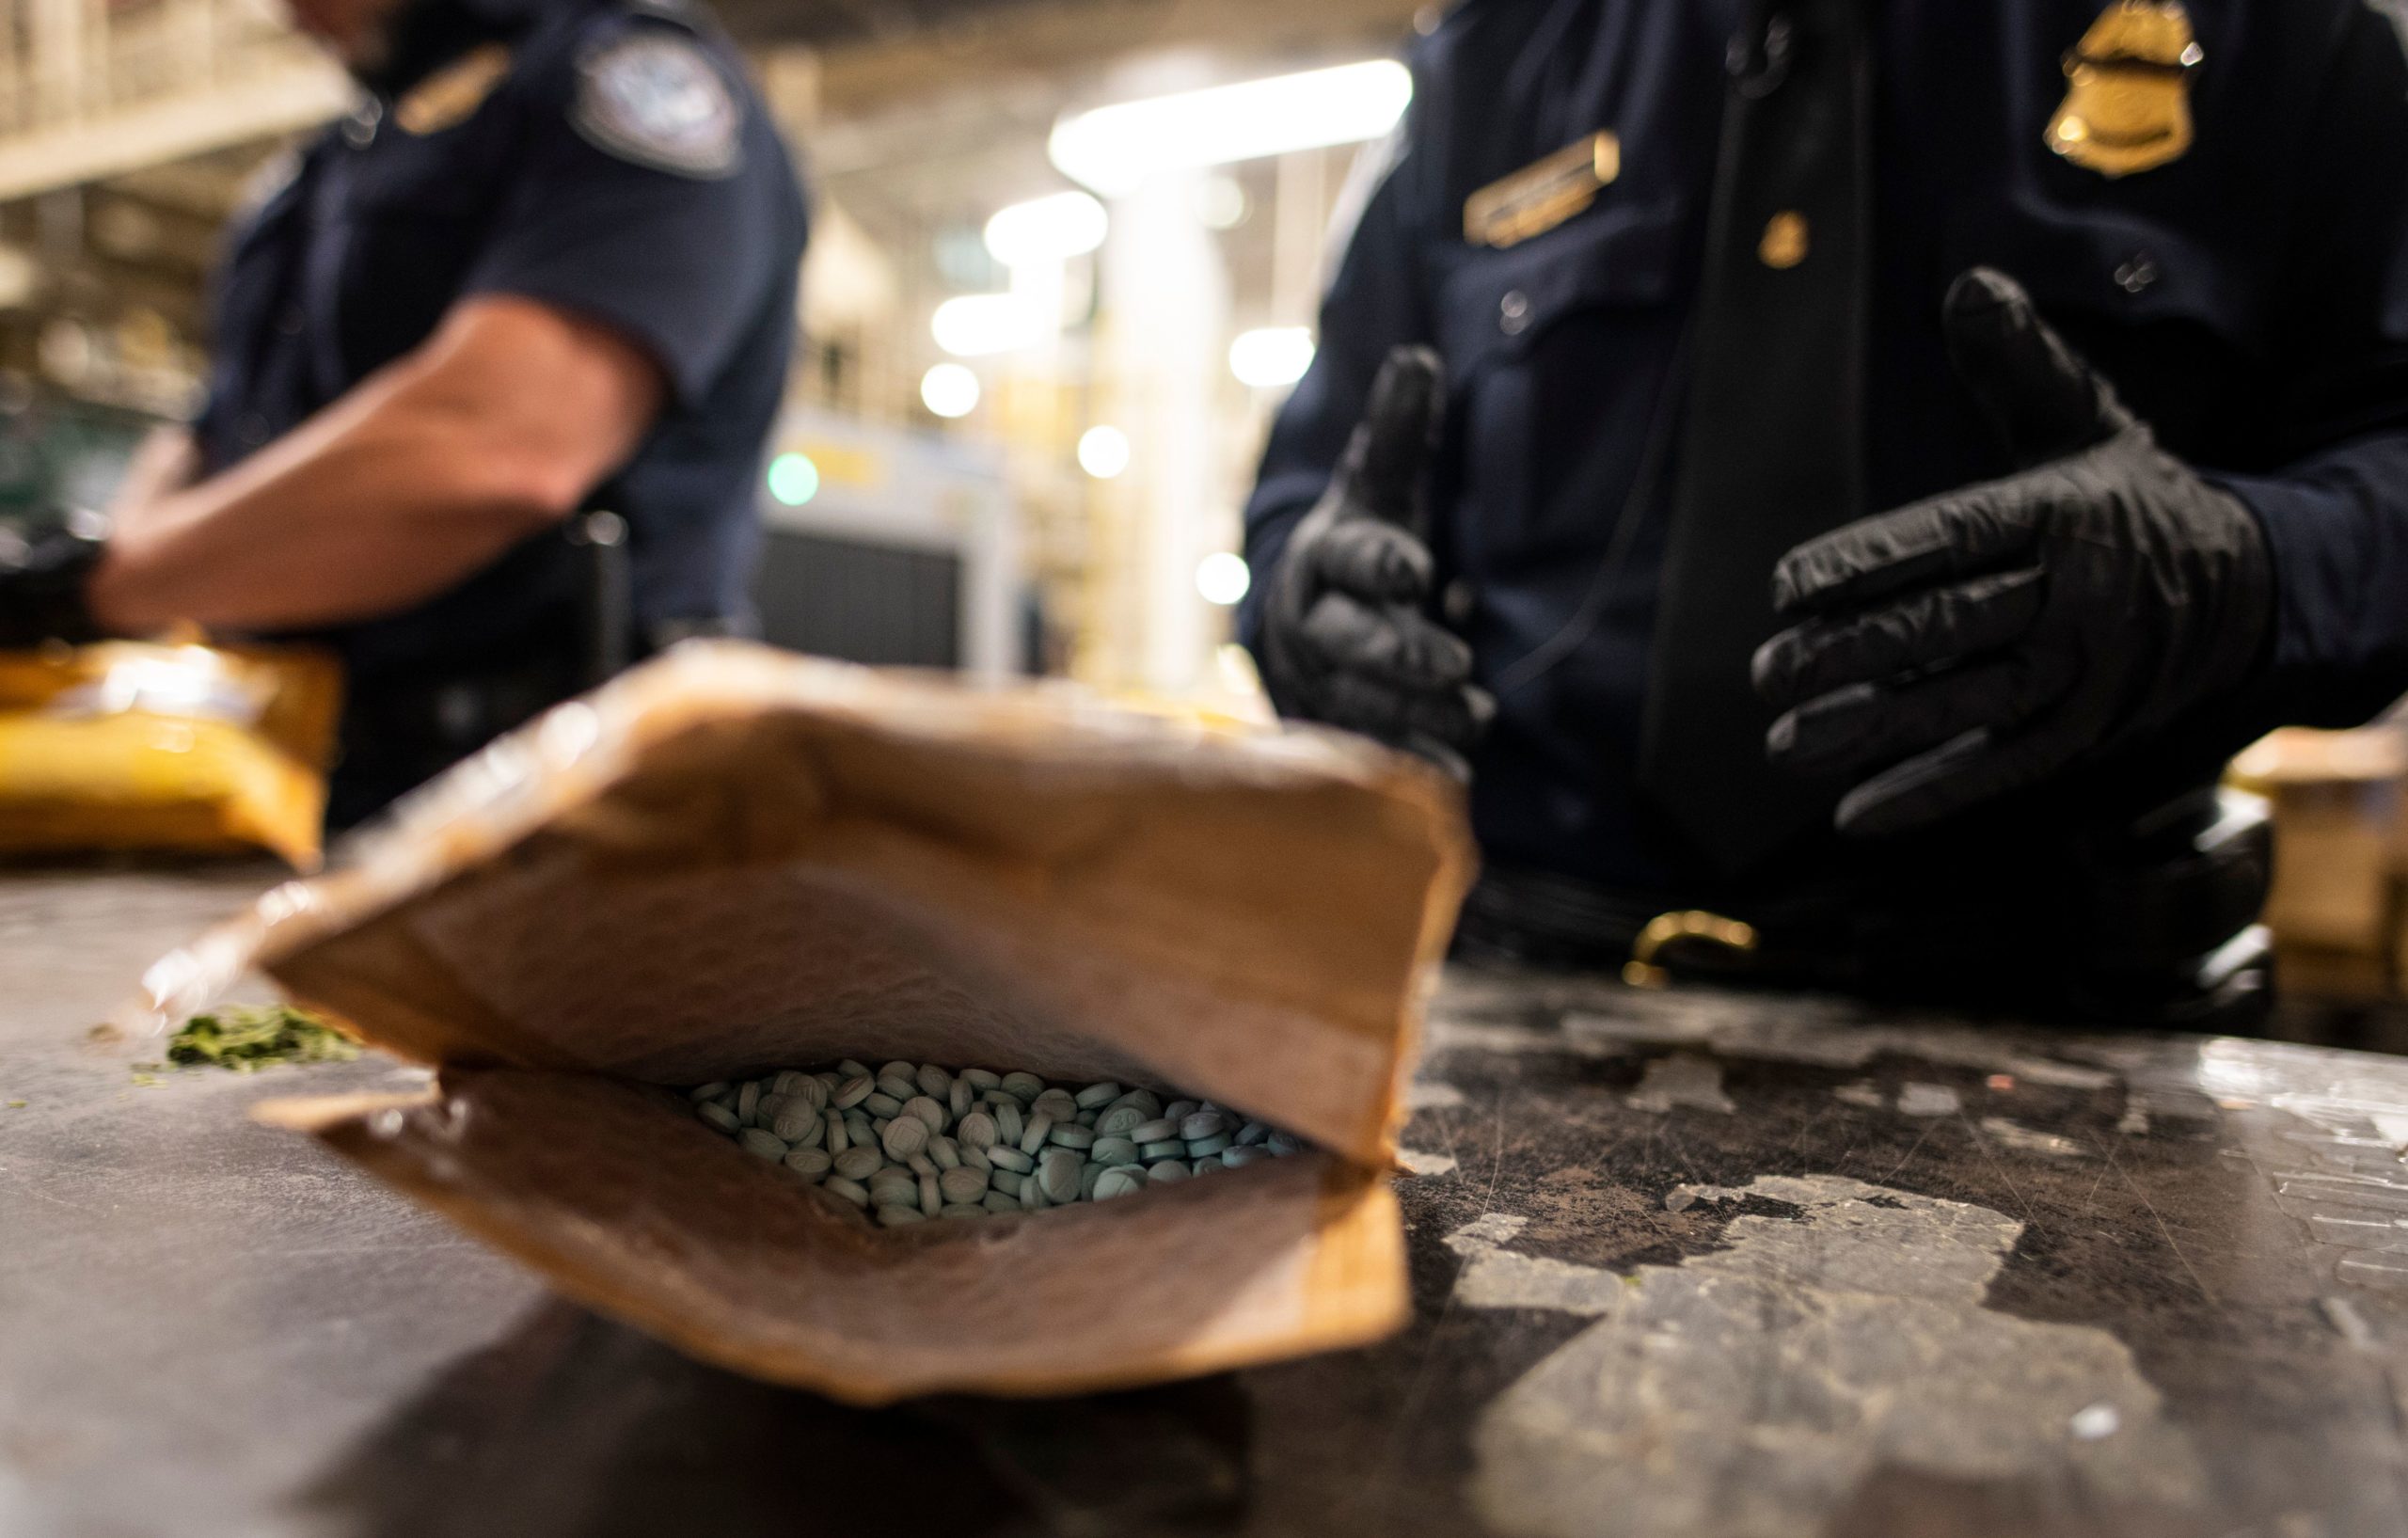 An officer from the US Customs and Border Protection, Trade and Cargo Division finds Oxycodon pills in a parcel at John F. Kennedy Airport's US Postal Service facility on June 24, 2019 in New York. (Photo by JOHANNES EISELE/AFP via Getty Images)